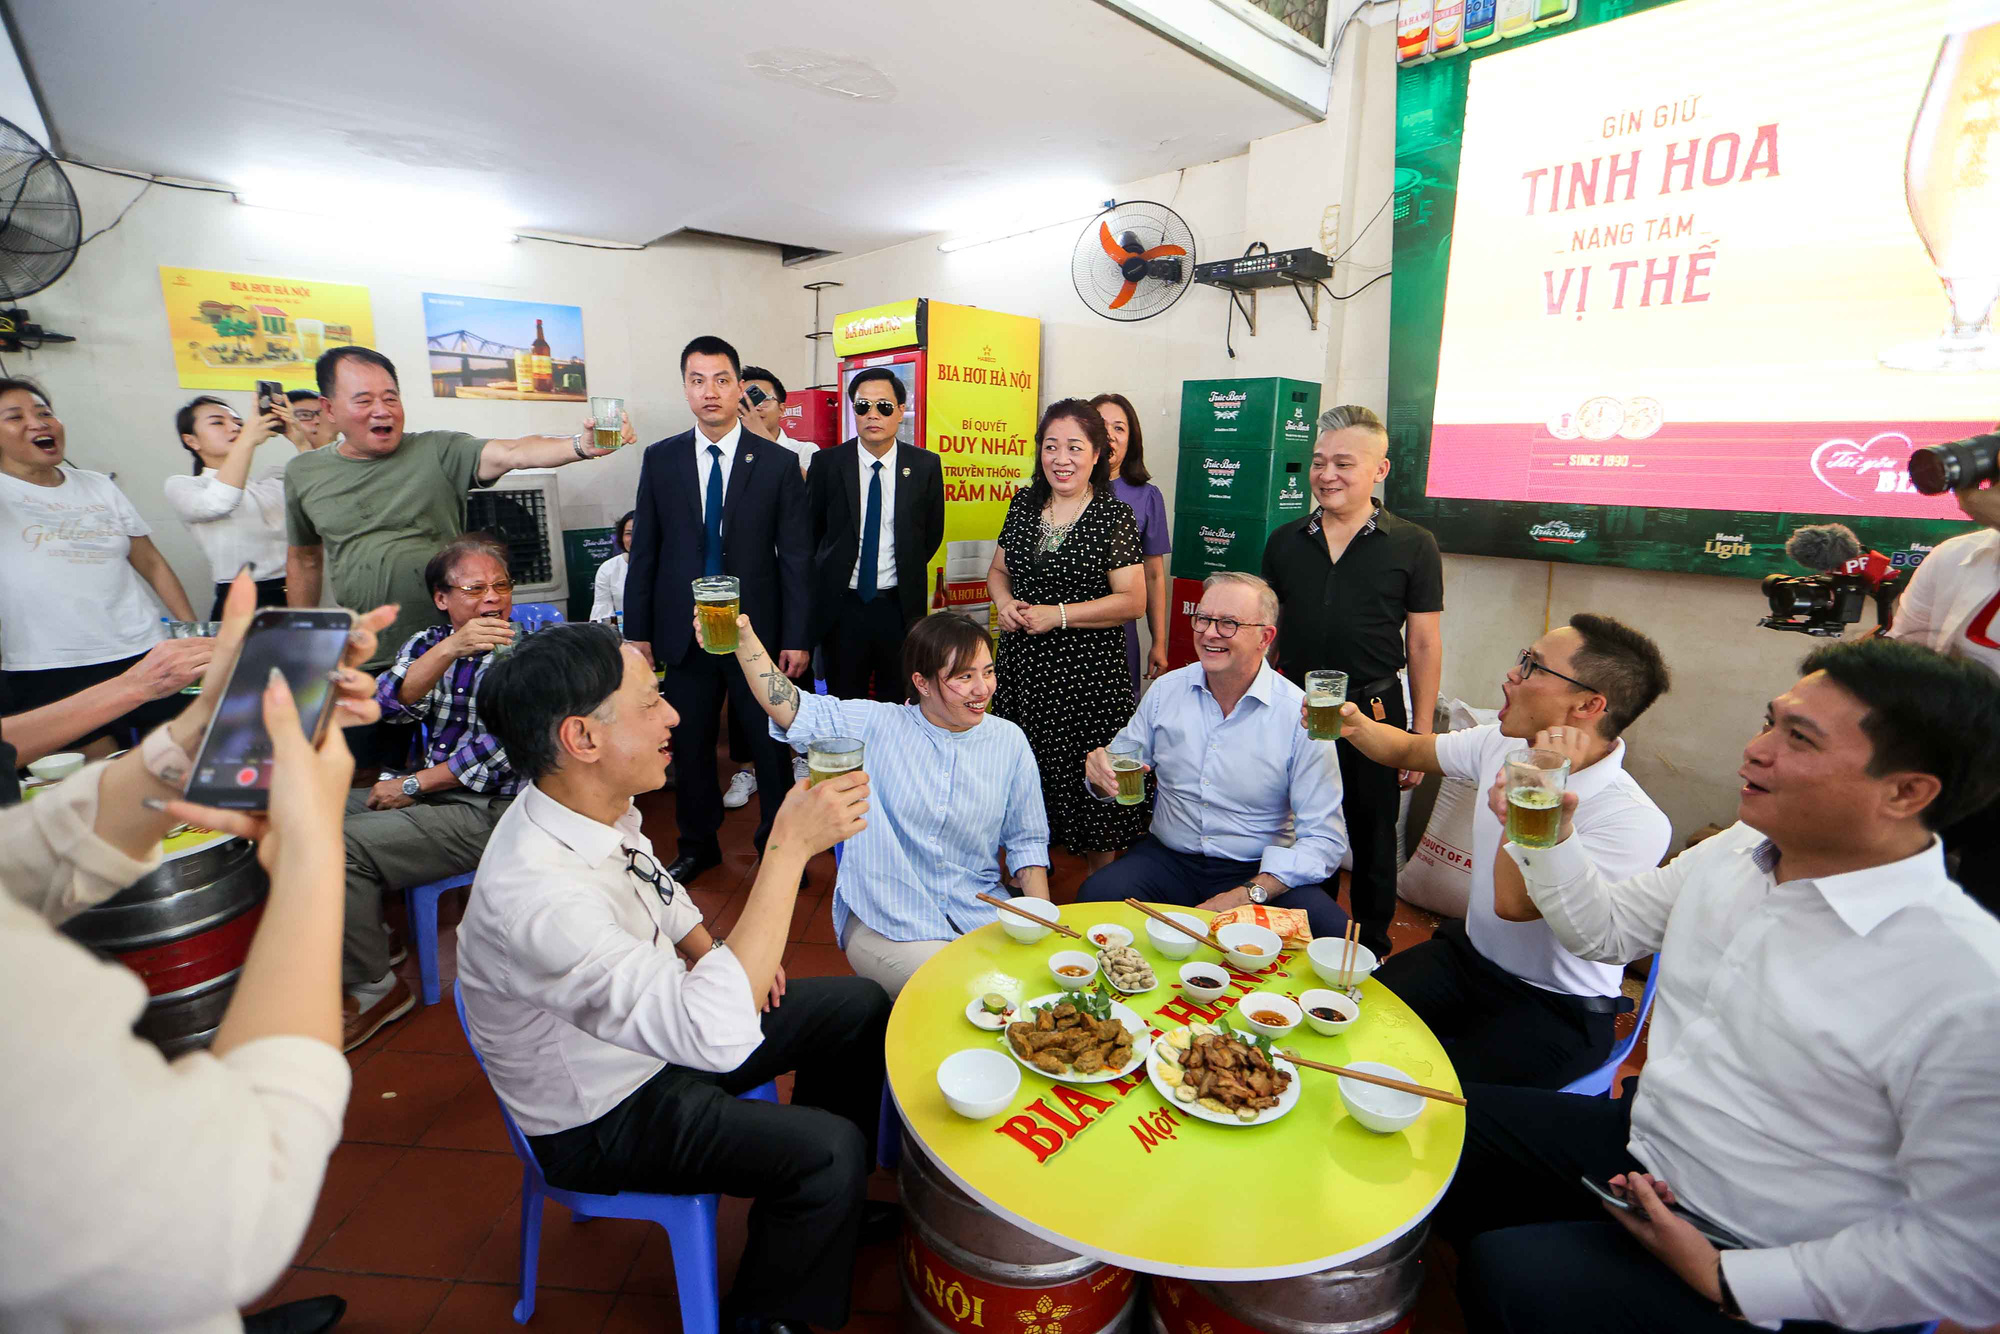 PM Albanese jointly says "Mot, hai, ba, Do!" (one, two, three, Cheers!) and chats with people drinking beer in the shop